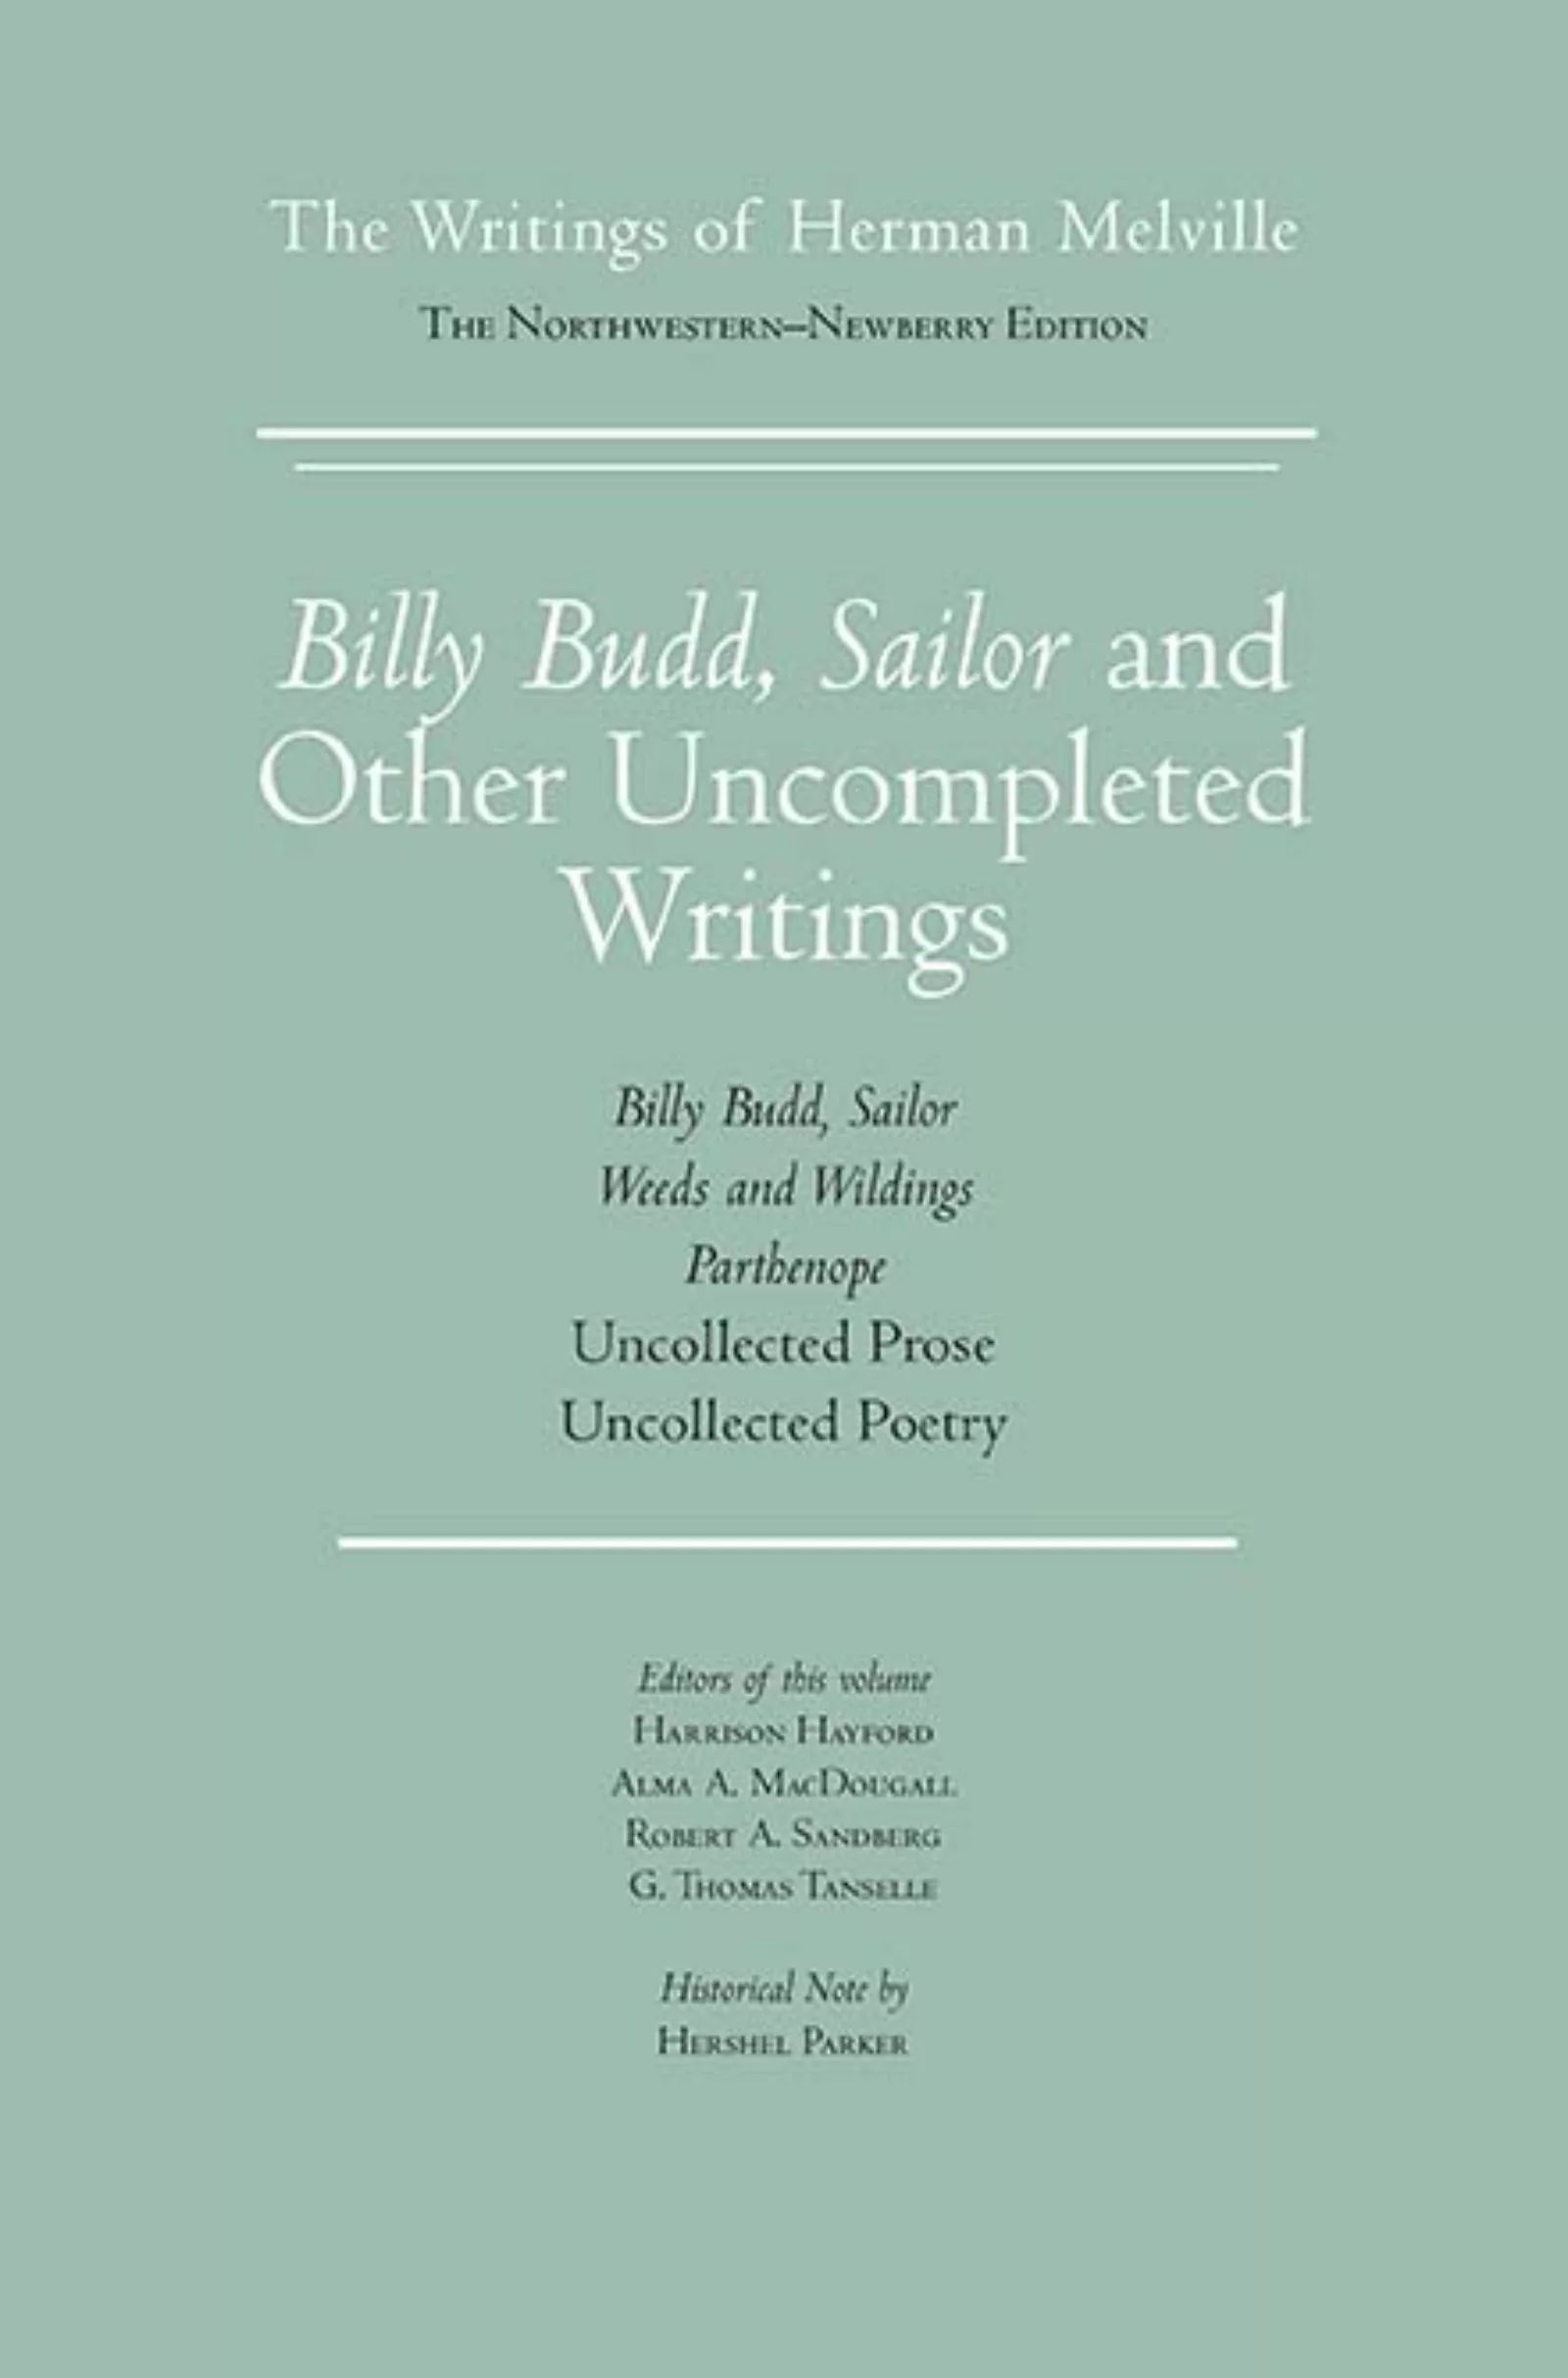 Billy Budd, Sailor and Other Uncompleted Writings, 2017, the final work in the 15-volume edition